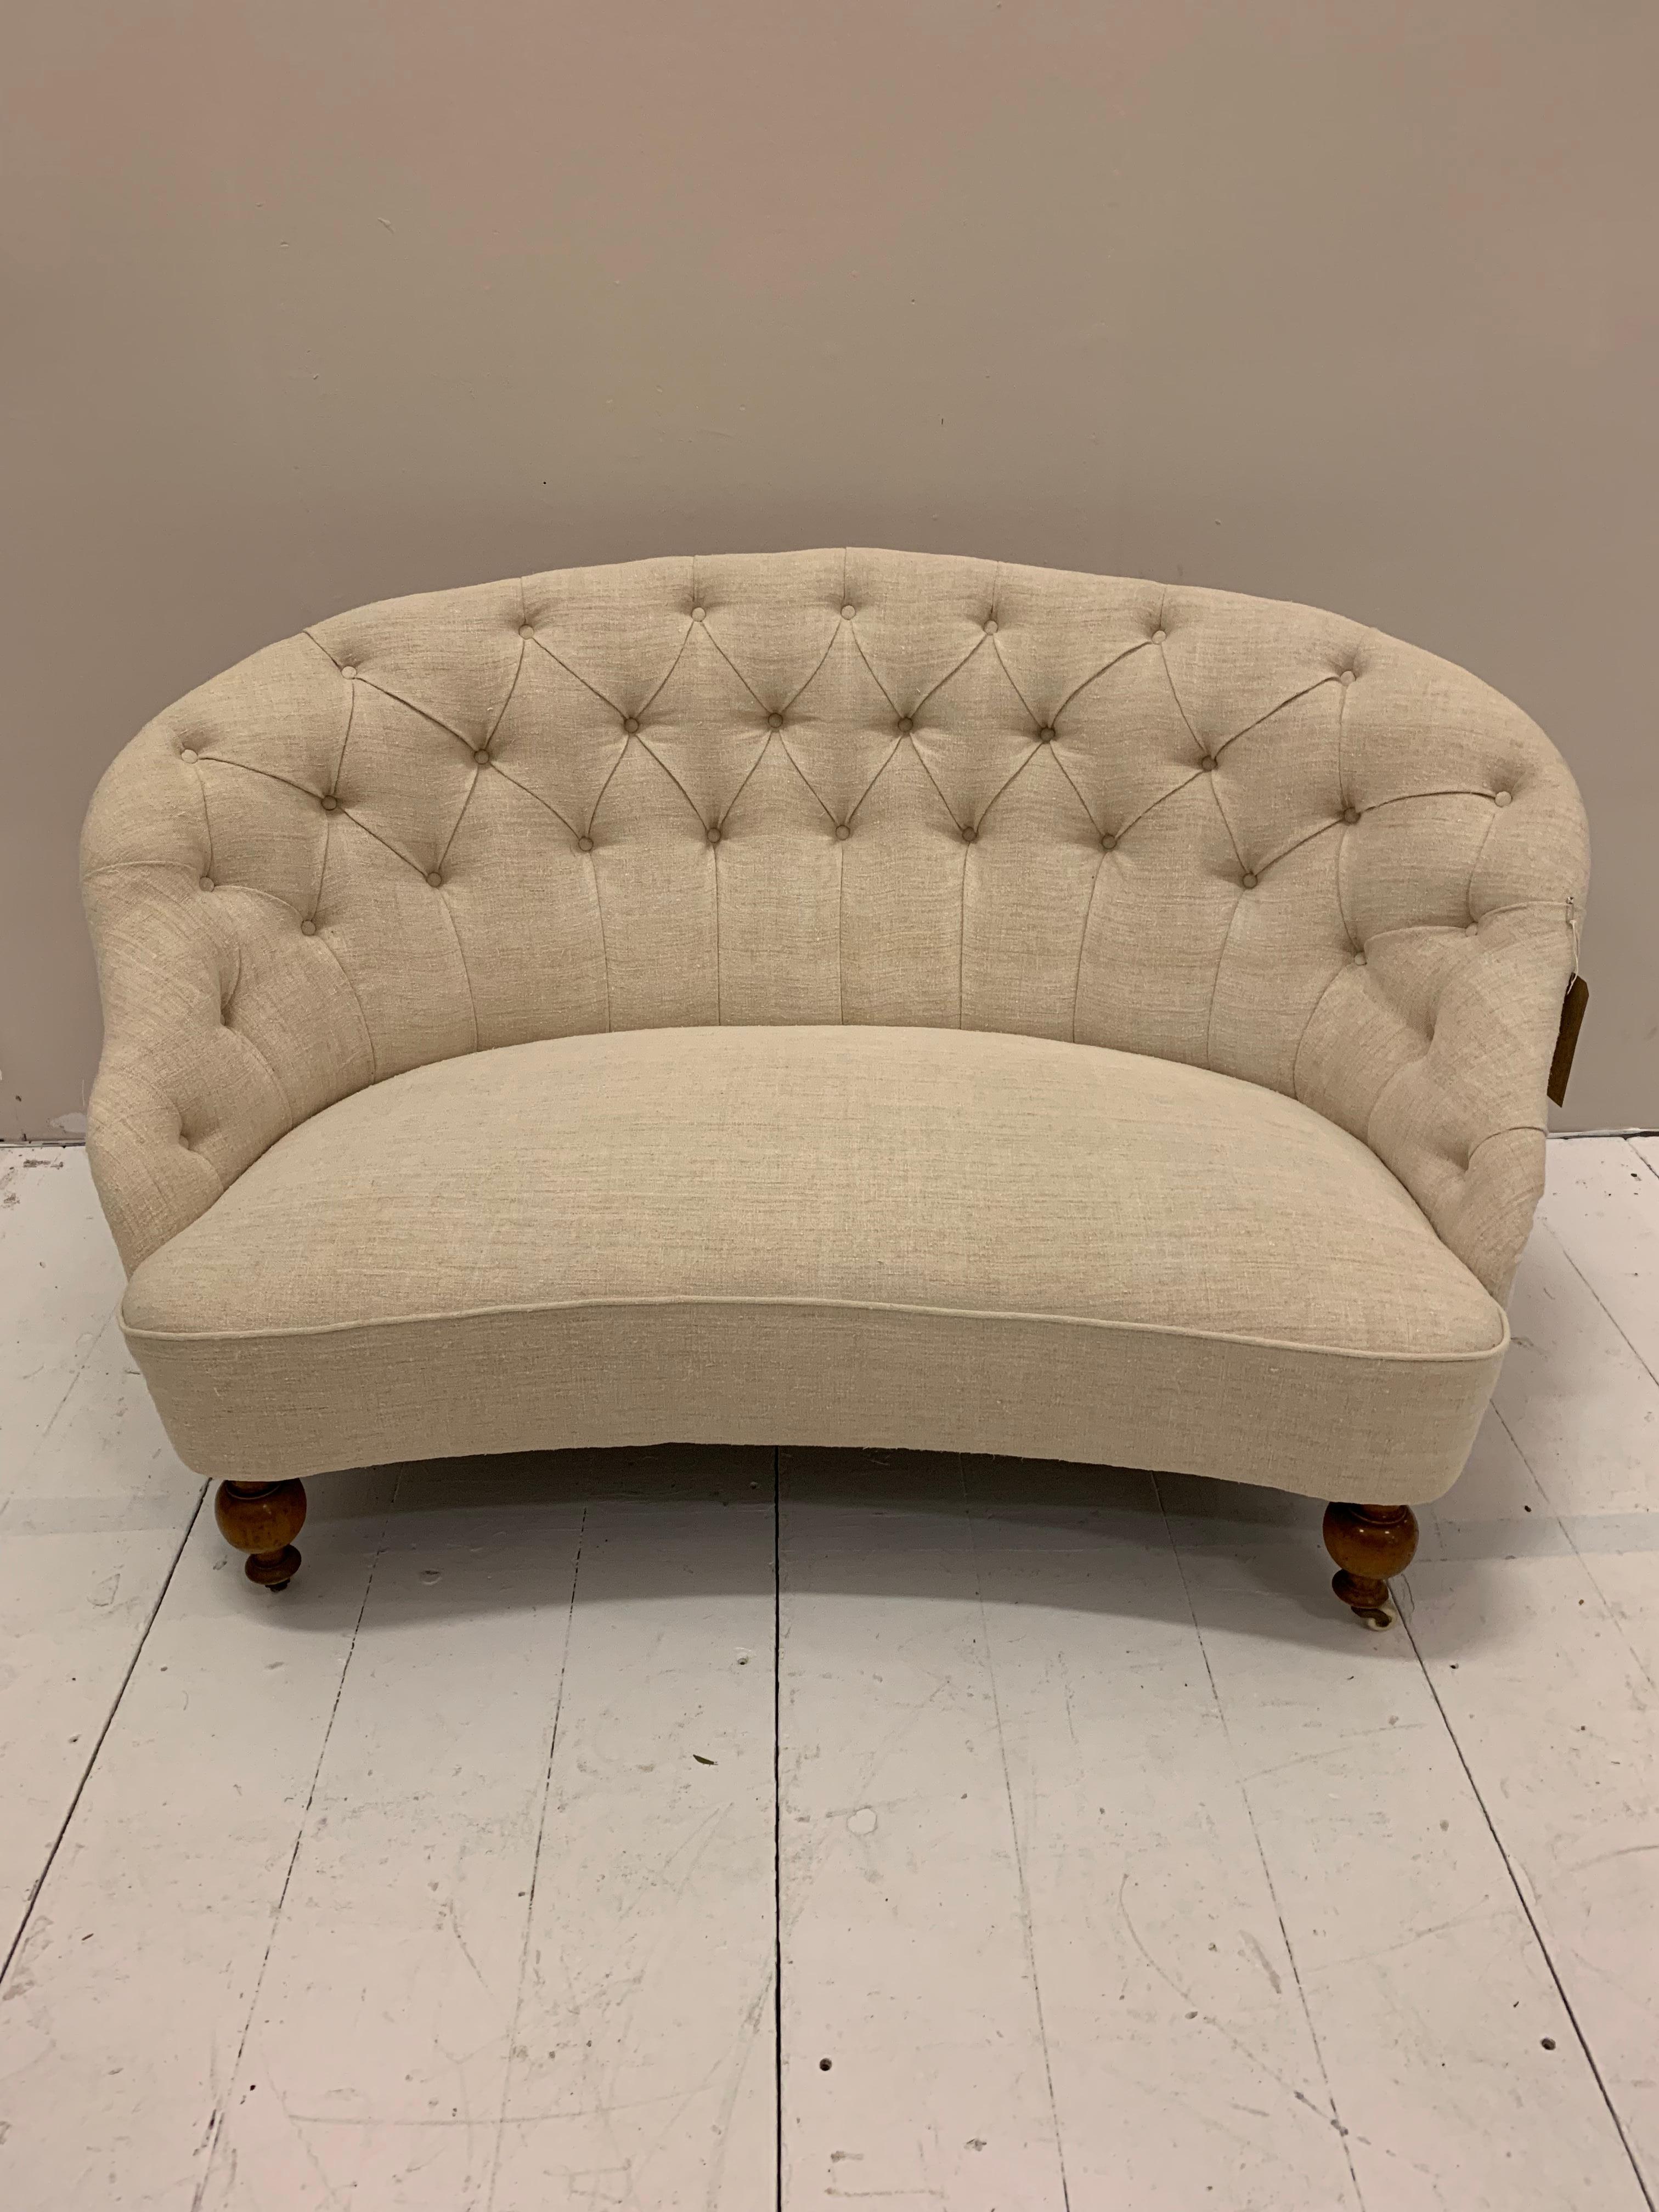 Swedish buttoned back two-seater sofa upholstered in an antique neutral French linen.
This lovely nice quality 19th century iron framed sofa has a rounded back and sits above polished light brown wooden legs on castors.
It would easily work well